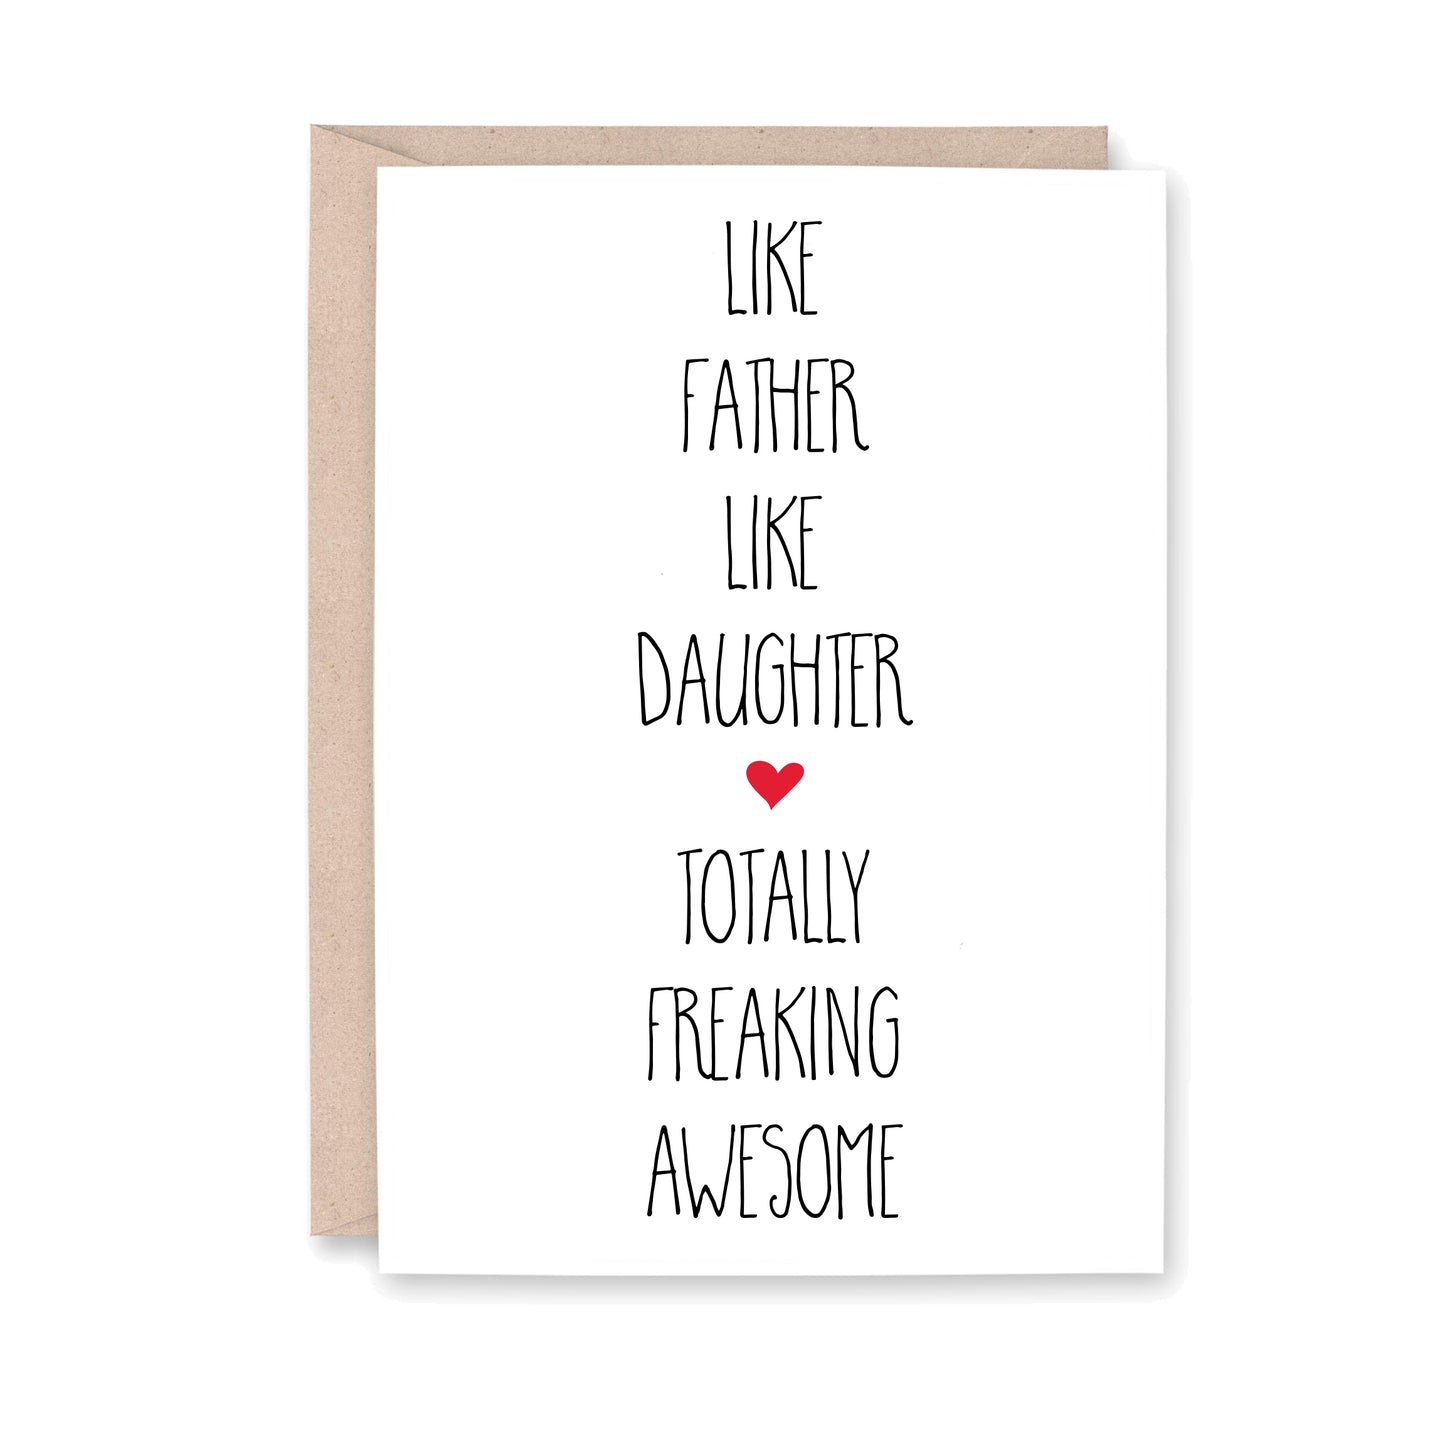 Like Father Like Daugher Totally freaking awesome (with small red heart in the middle of the card)